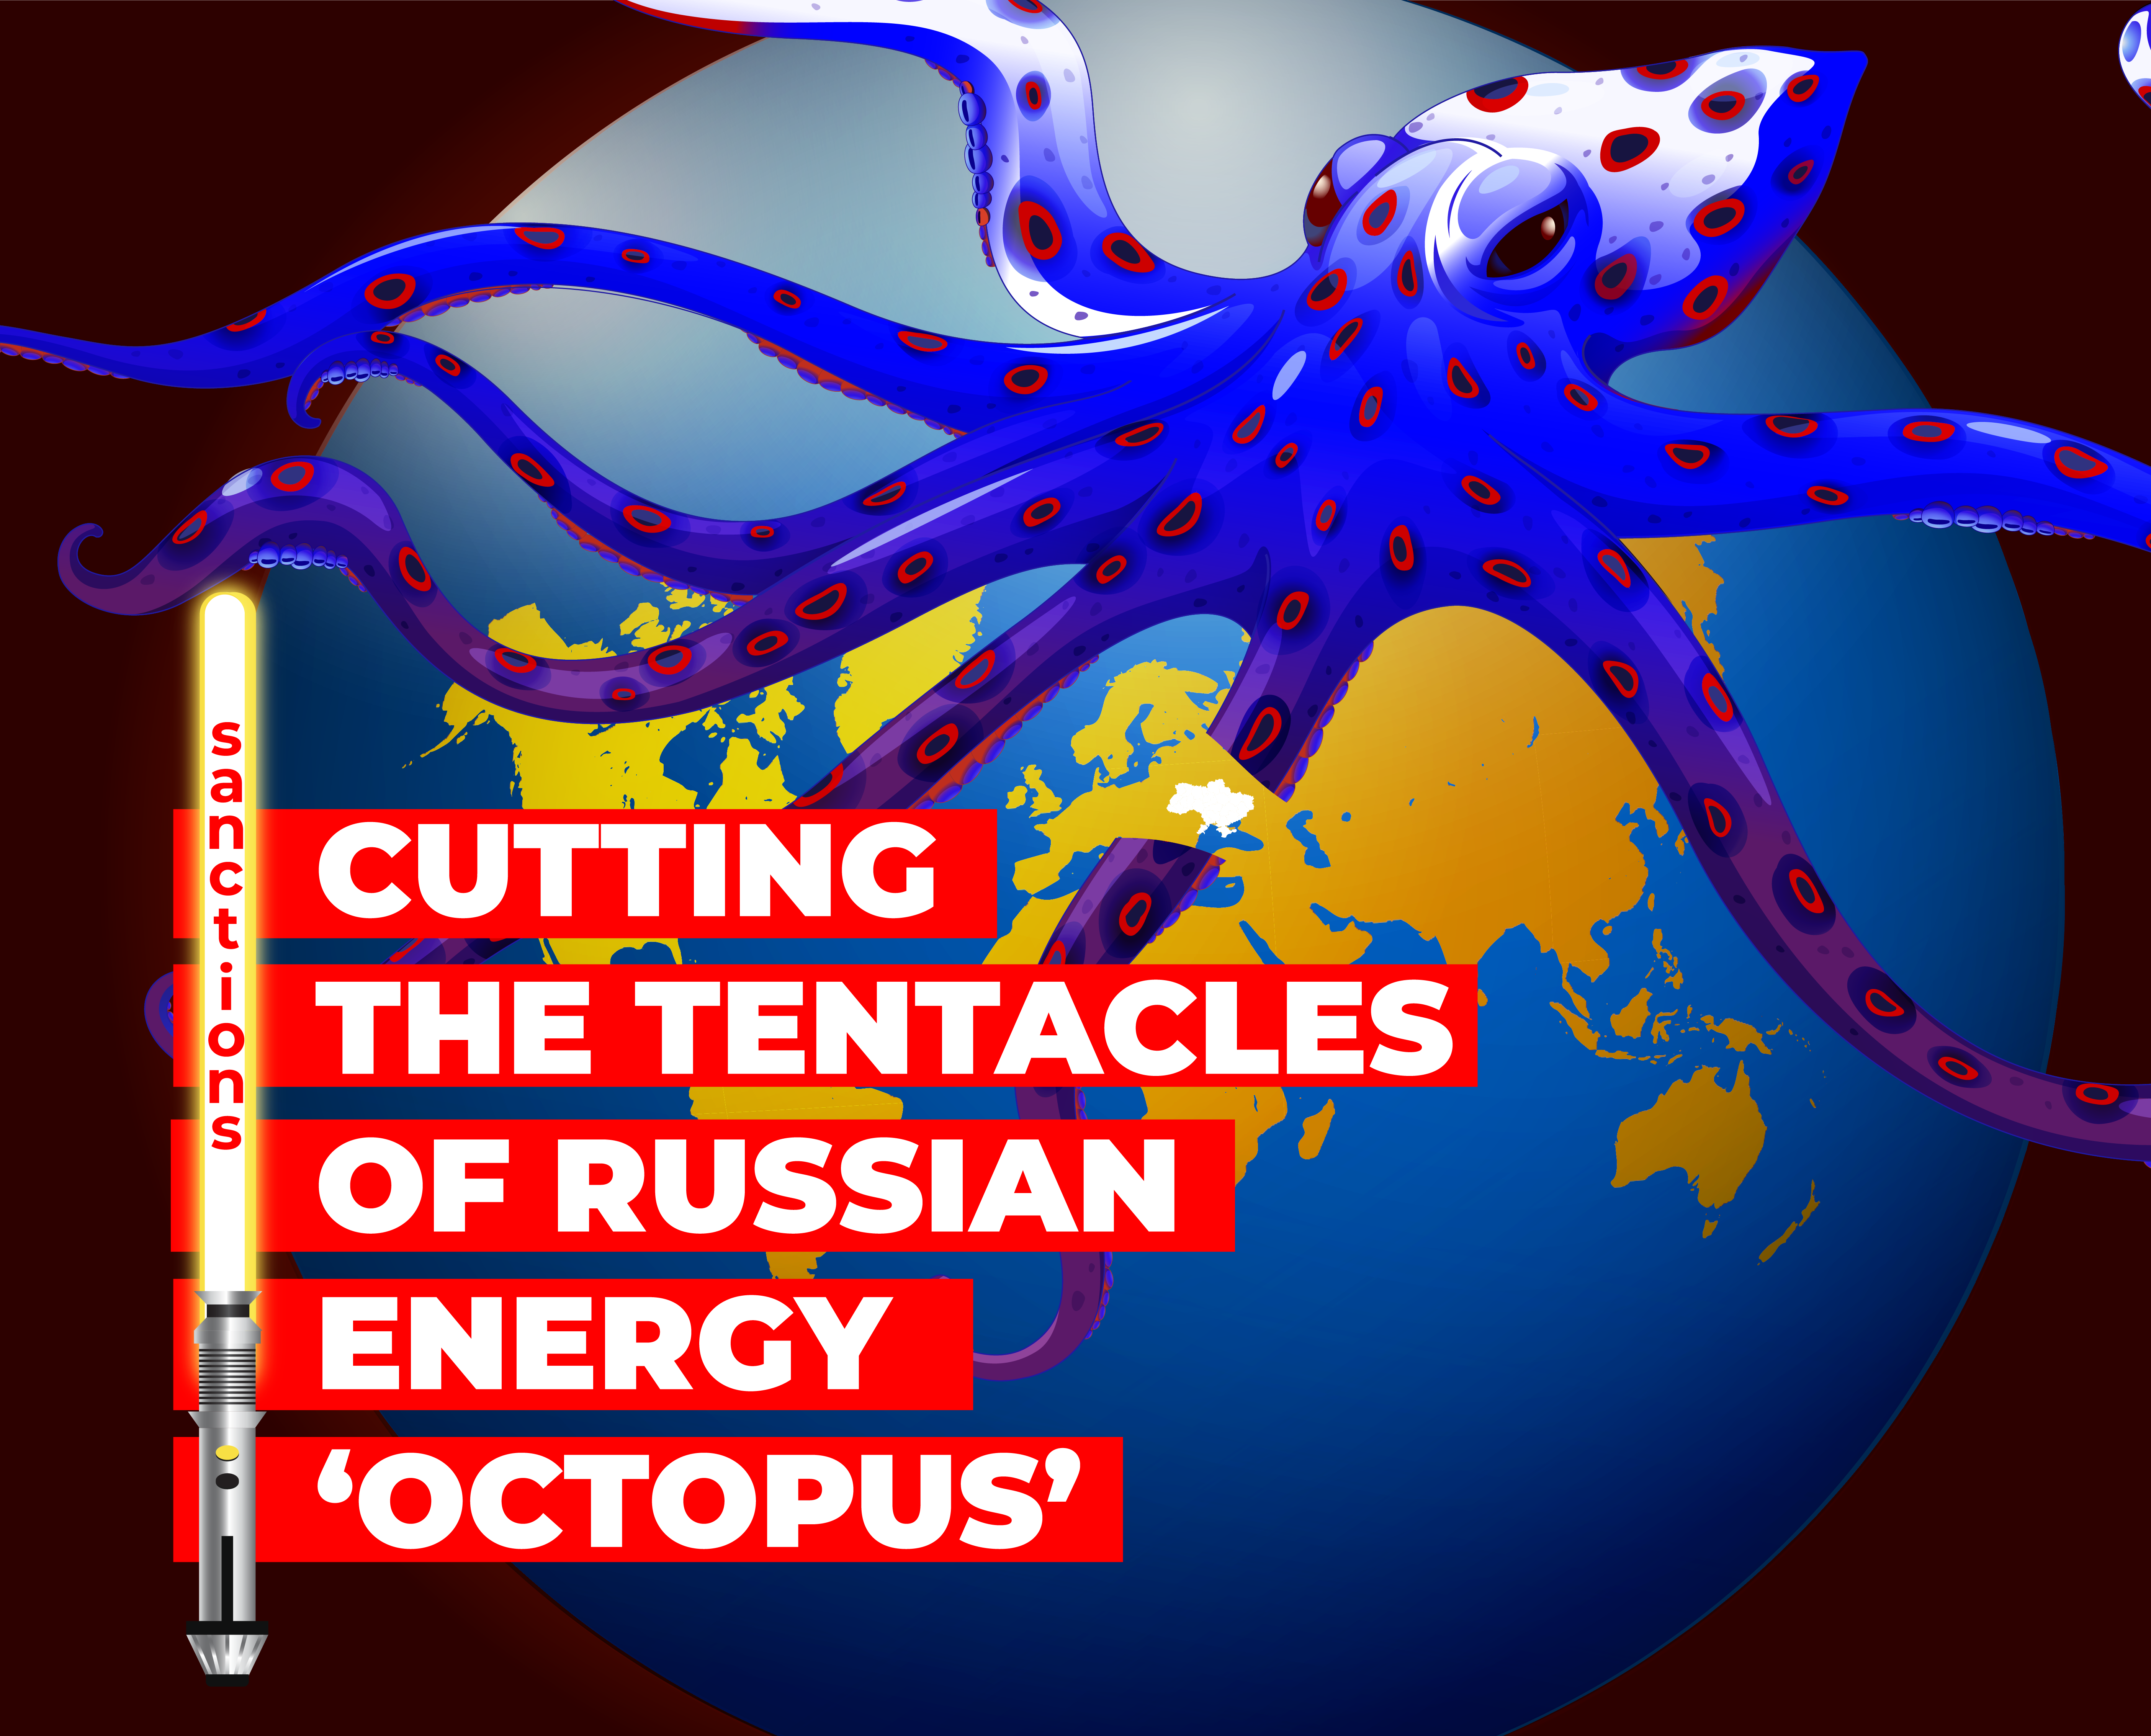 Gazprom Neft: how to cut off the tentacles of the Russian energy octopus